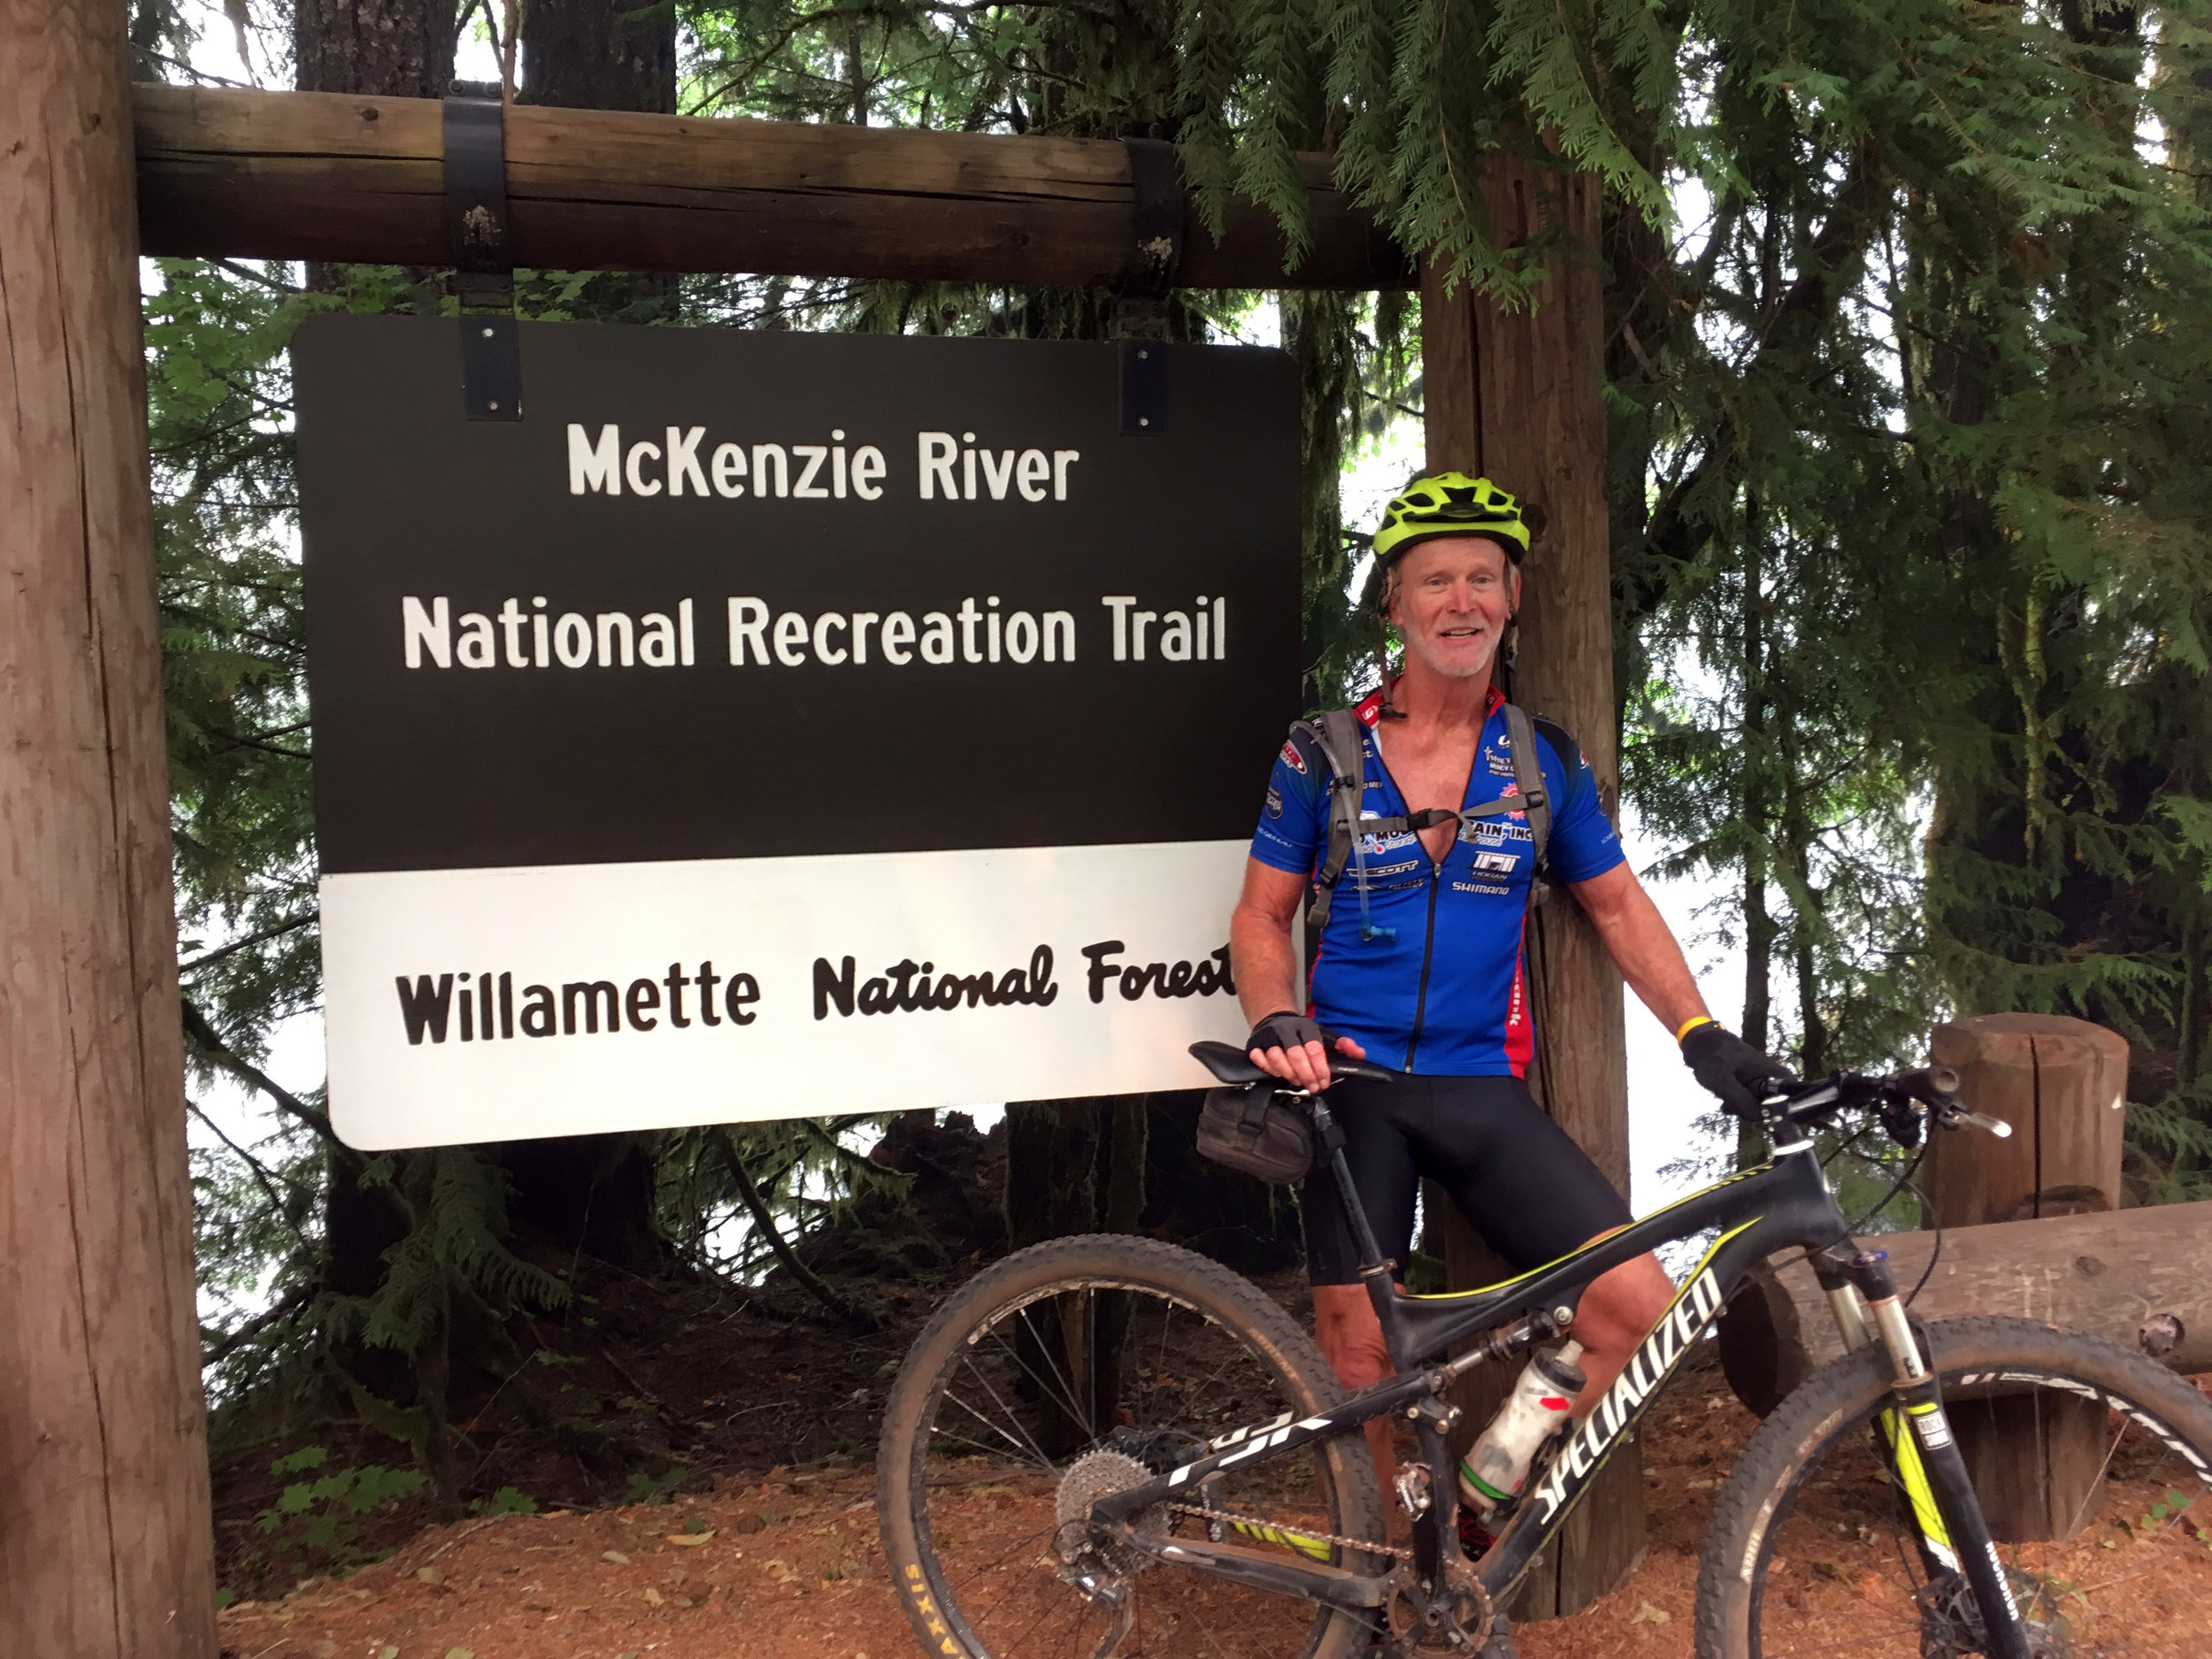  Top to bottom: Sweet rolling single track bordered by giant conifers. Bob with satisfied smile at finish of his McKenzie River Trail Adventure. 